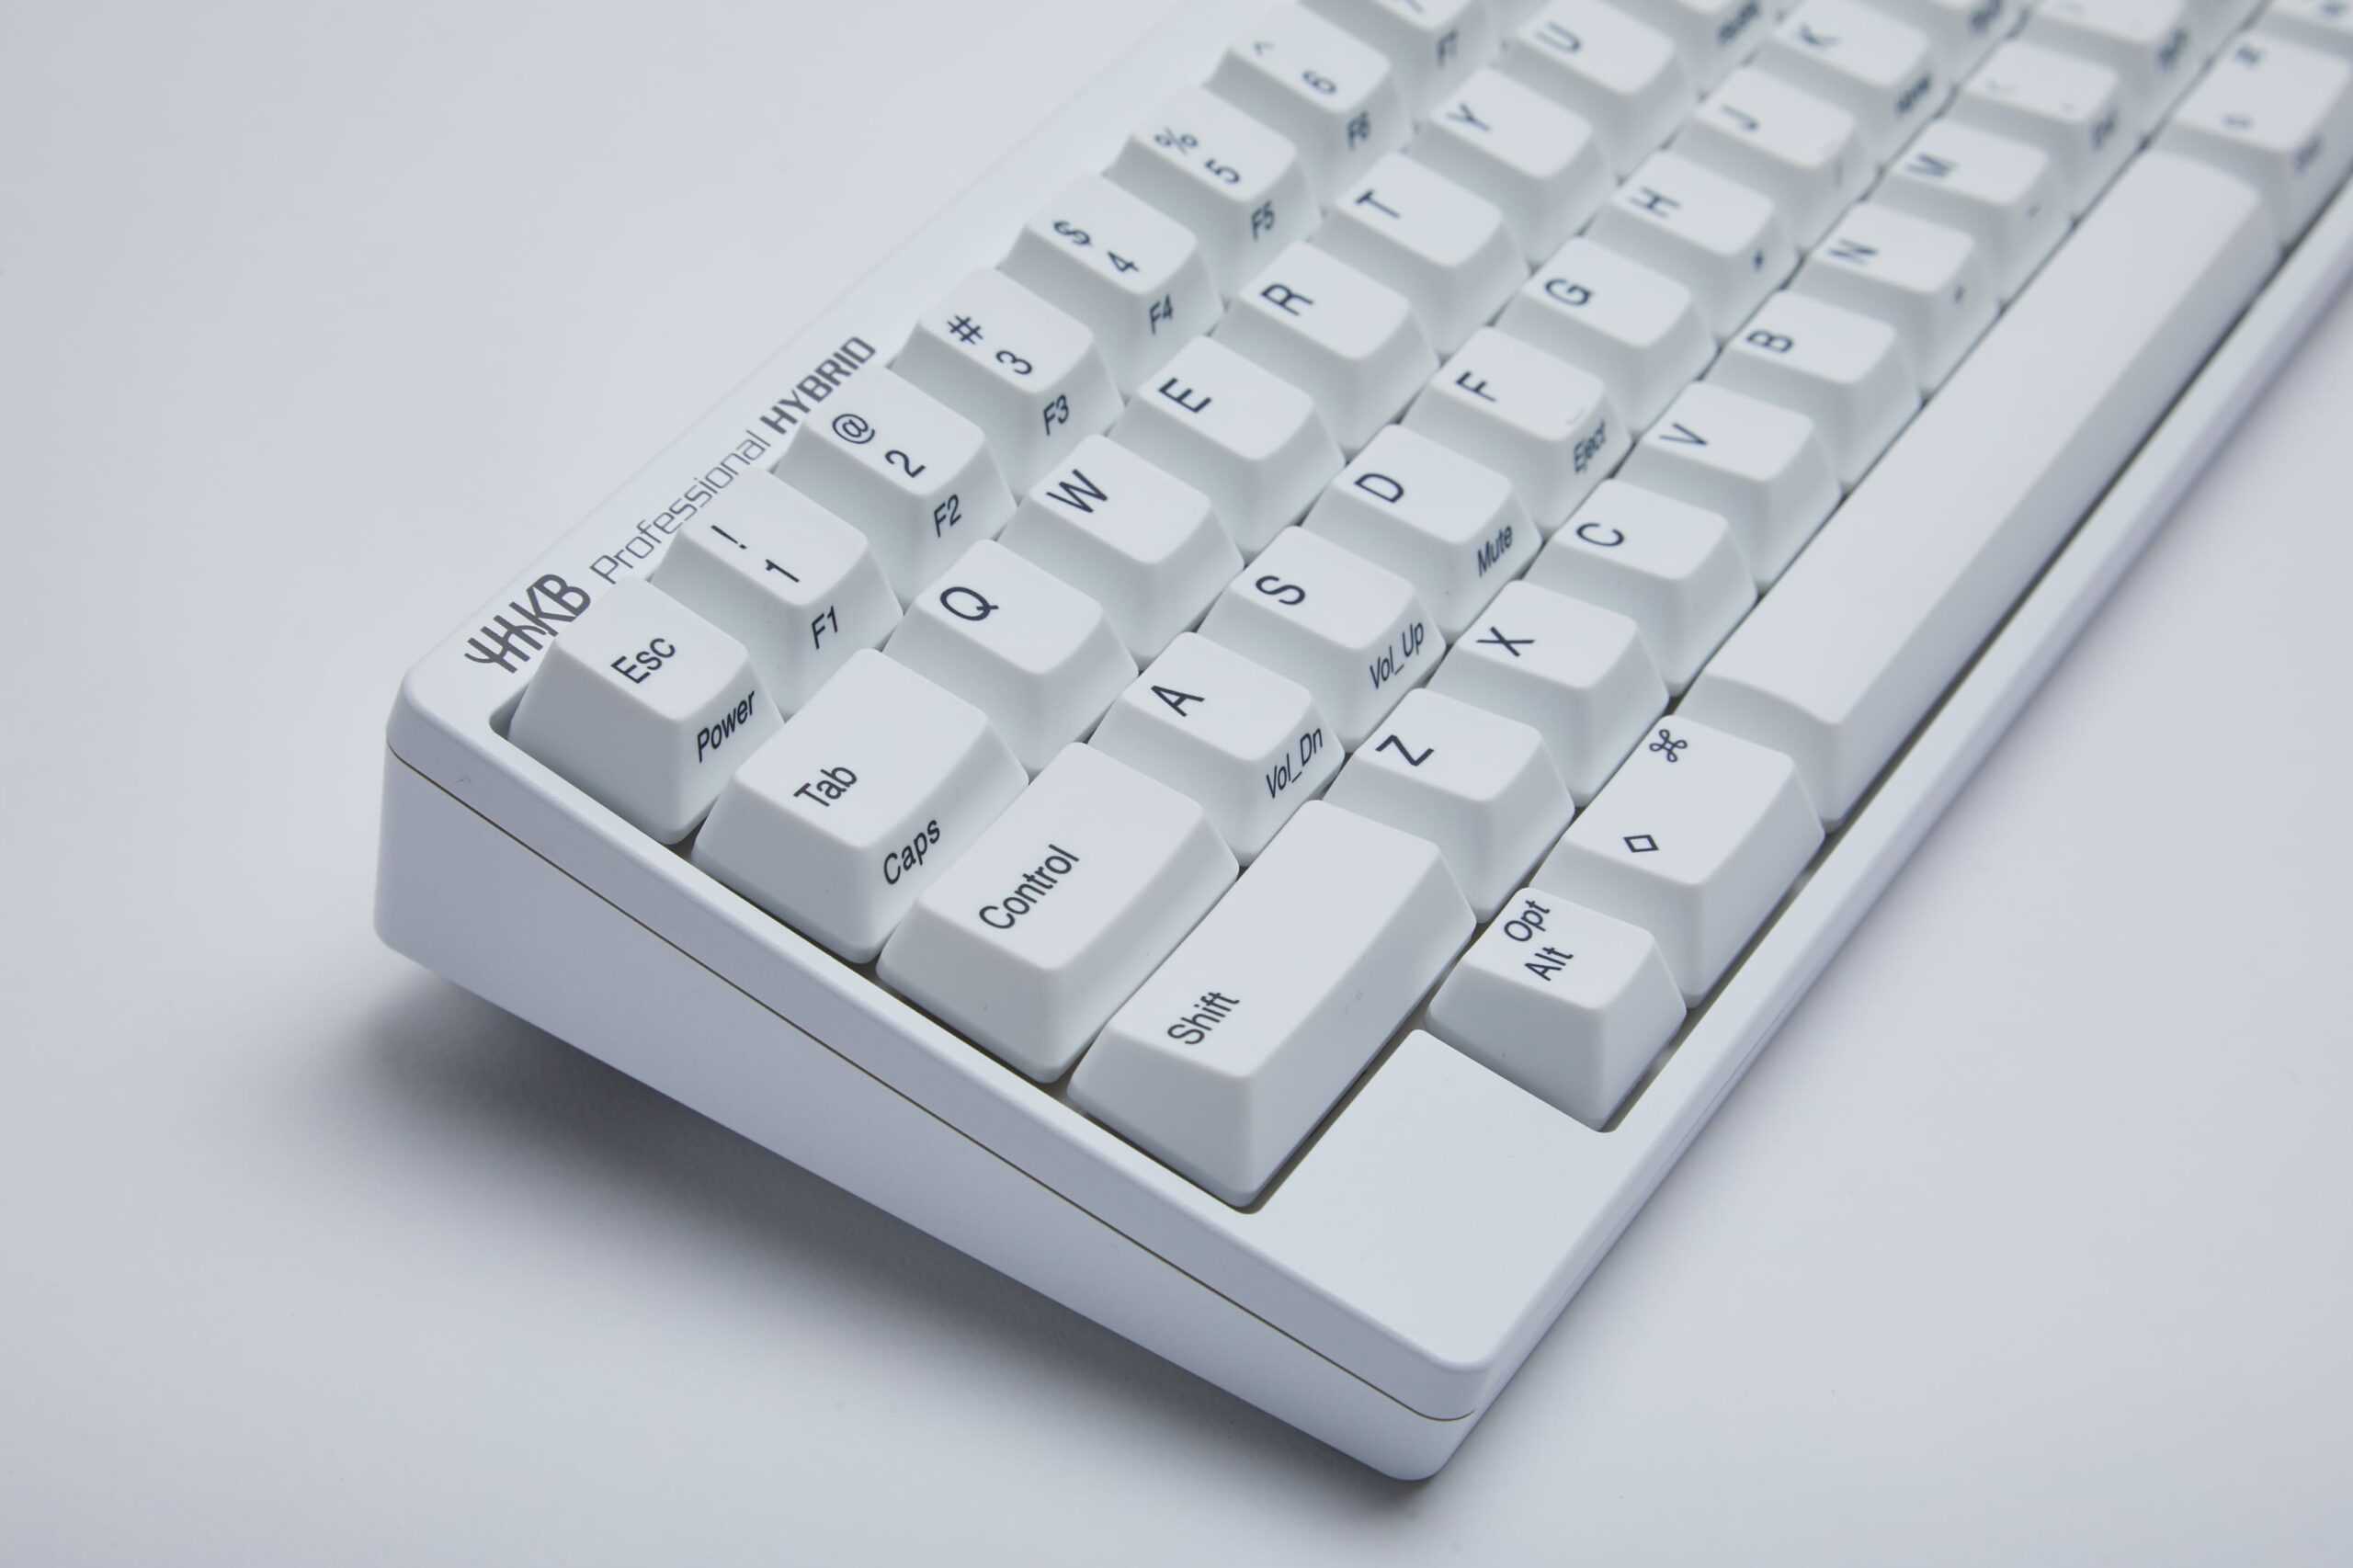 Happy Hacking Keyboard 25th Anniversary Limited Edition